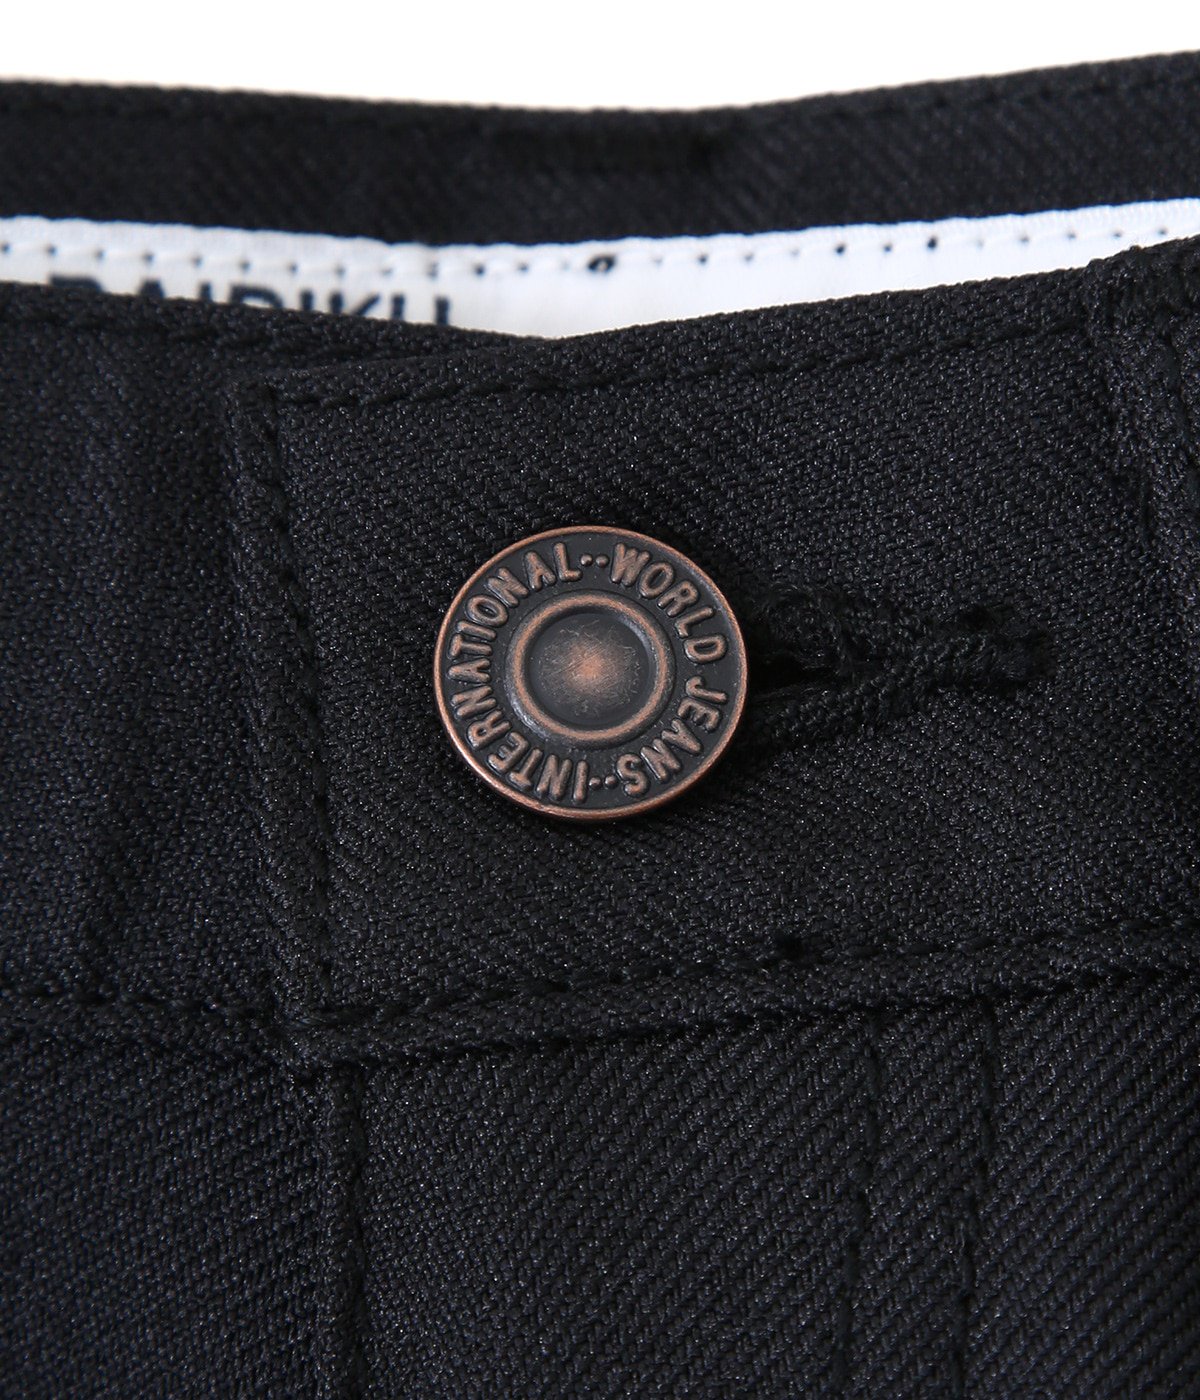 "Flare" Flasher Pressed Pants